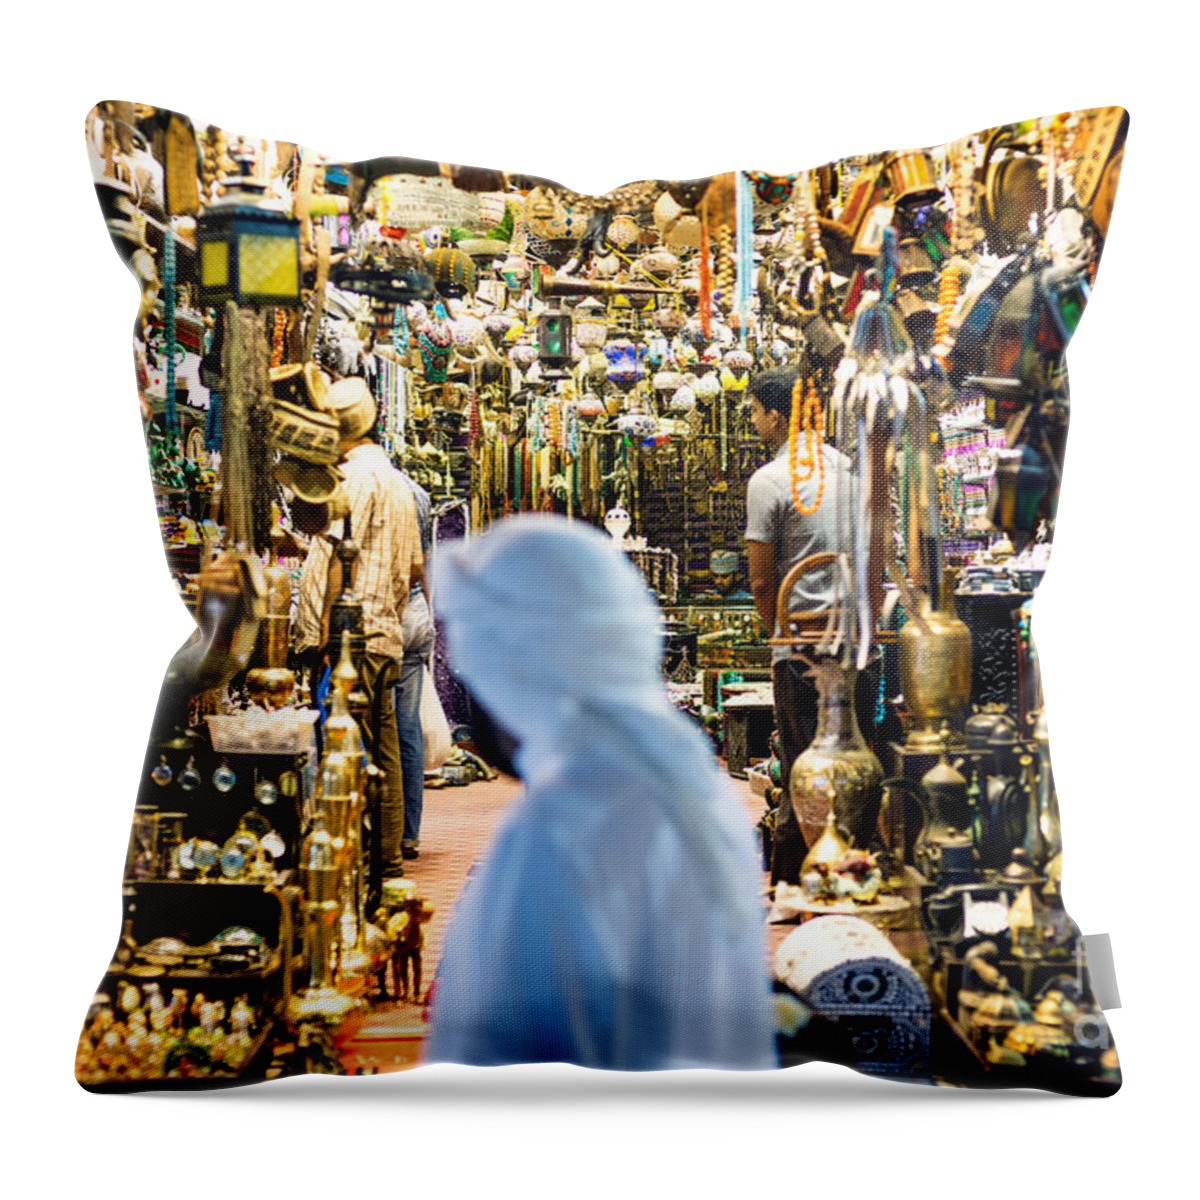 Oman Throw Pillow featuring the photograph The old souk of Muscat - Oman by Matteo Colombo